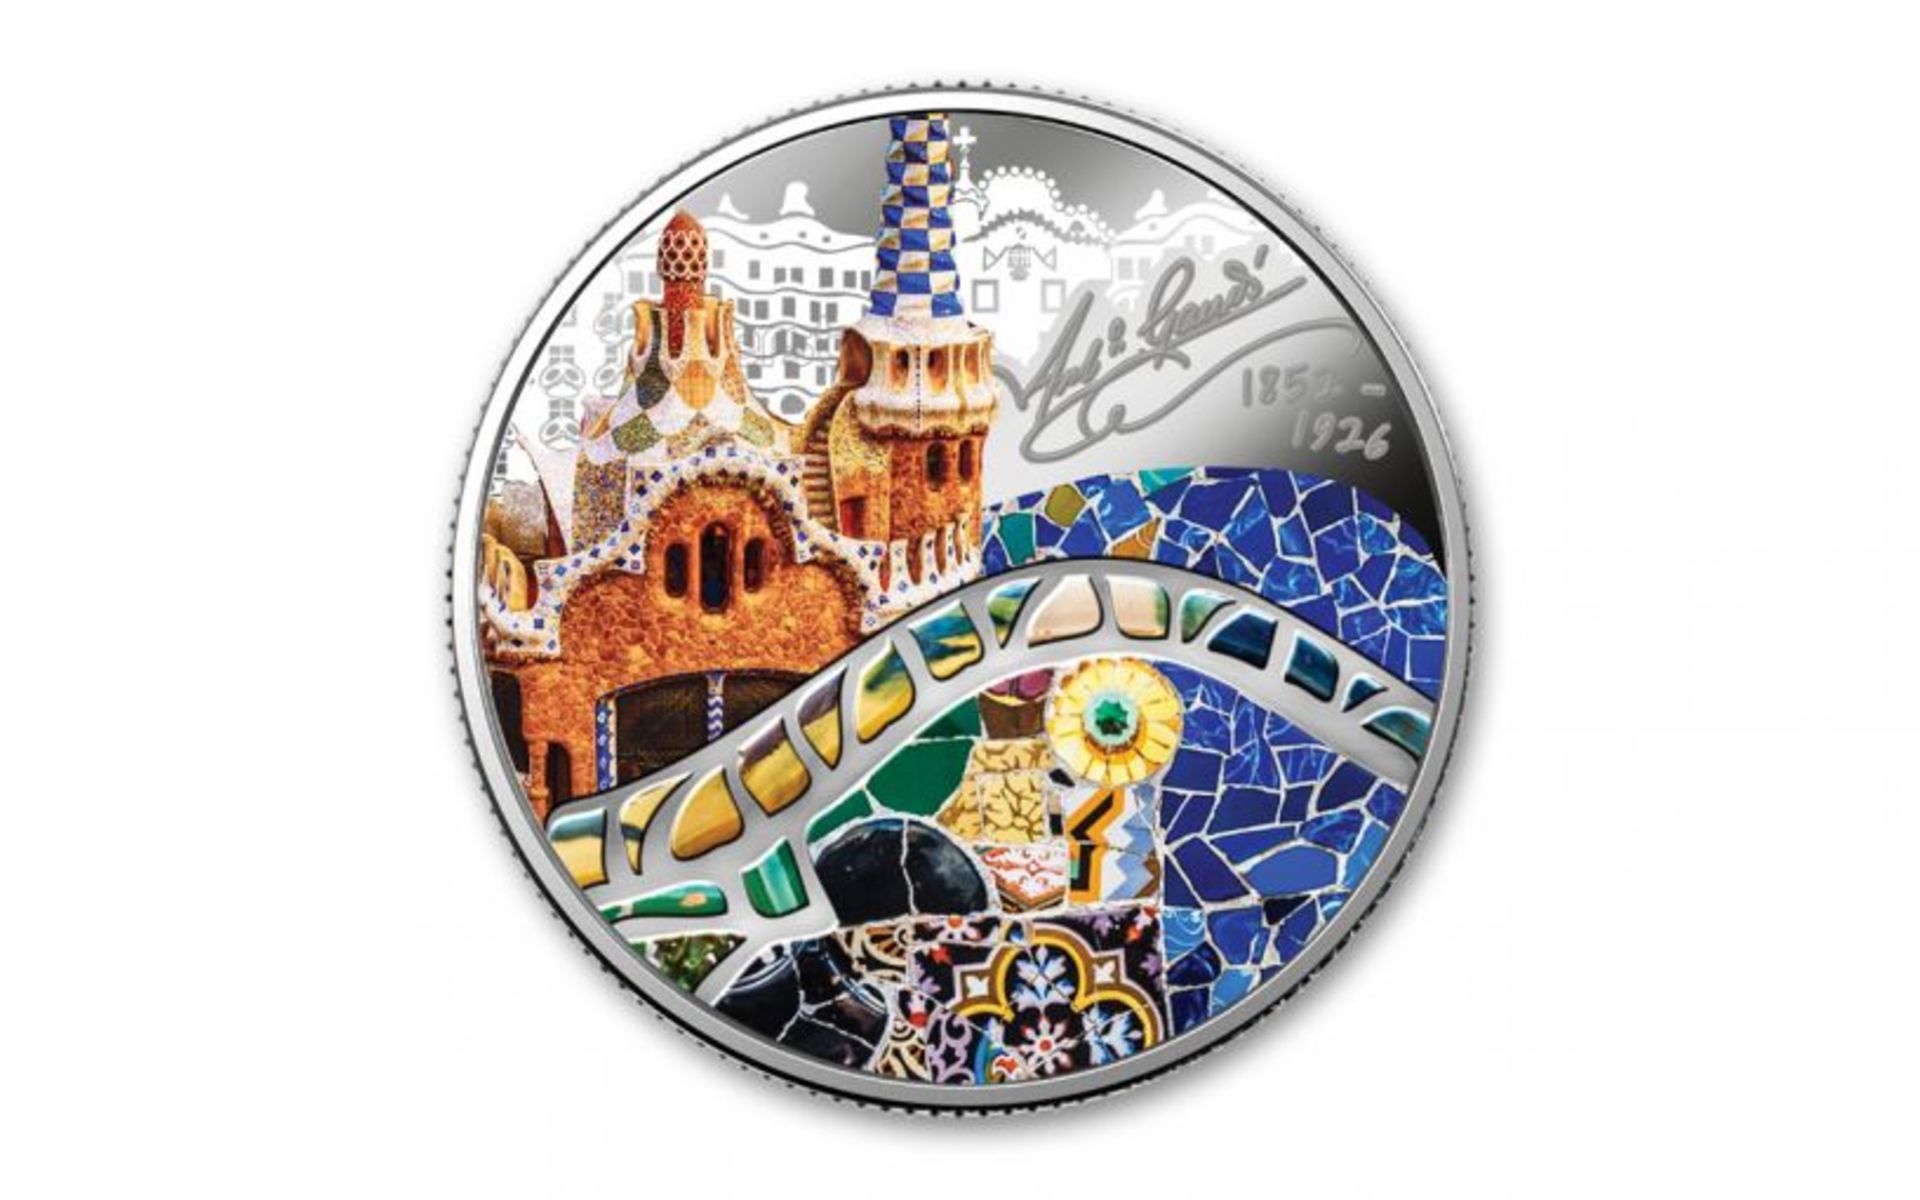 2022 Cameroon 1-oz Silver World of Gaudi Colorized Proof - Image 2 of 5